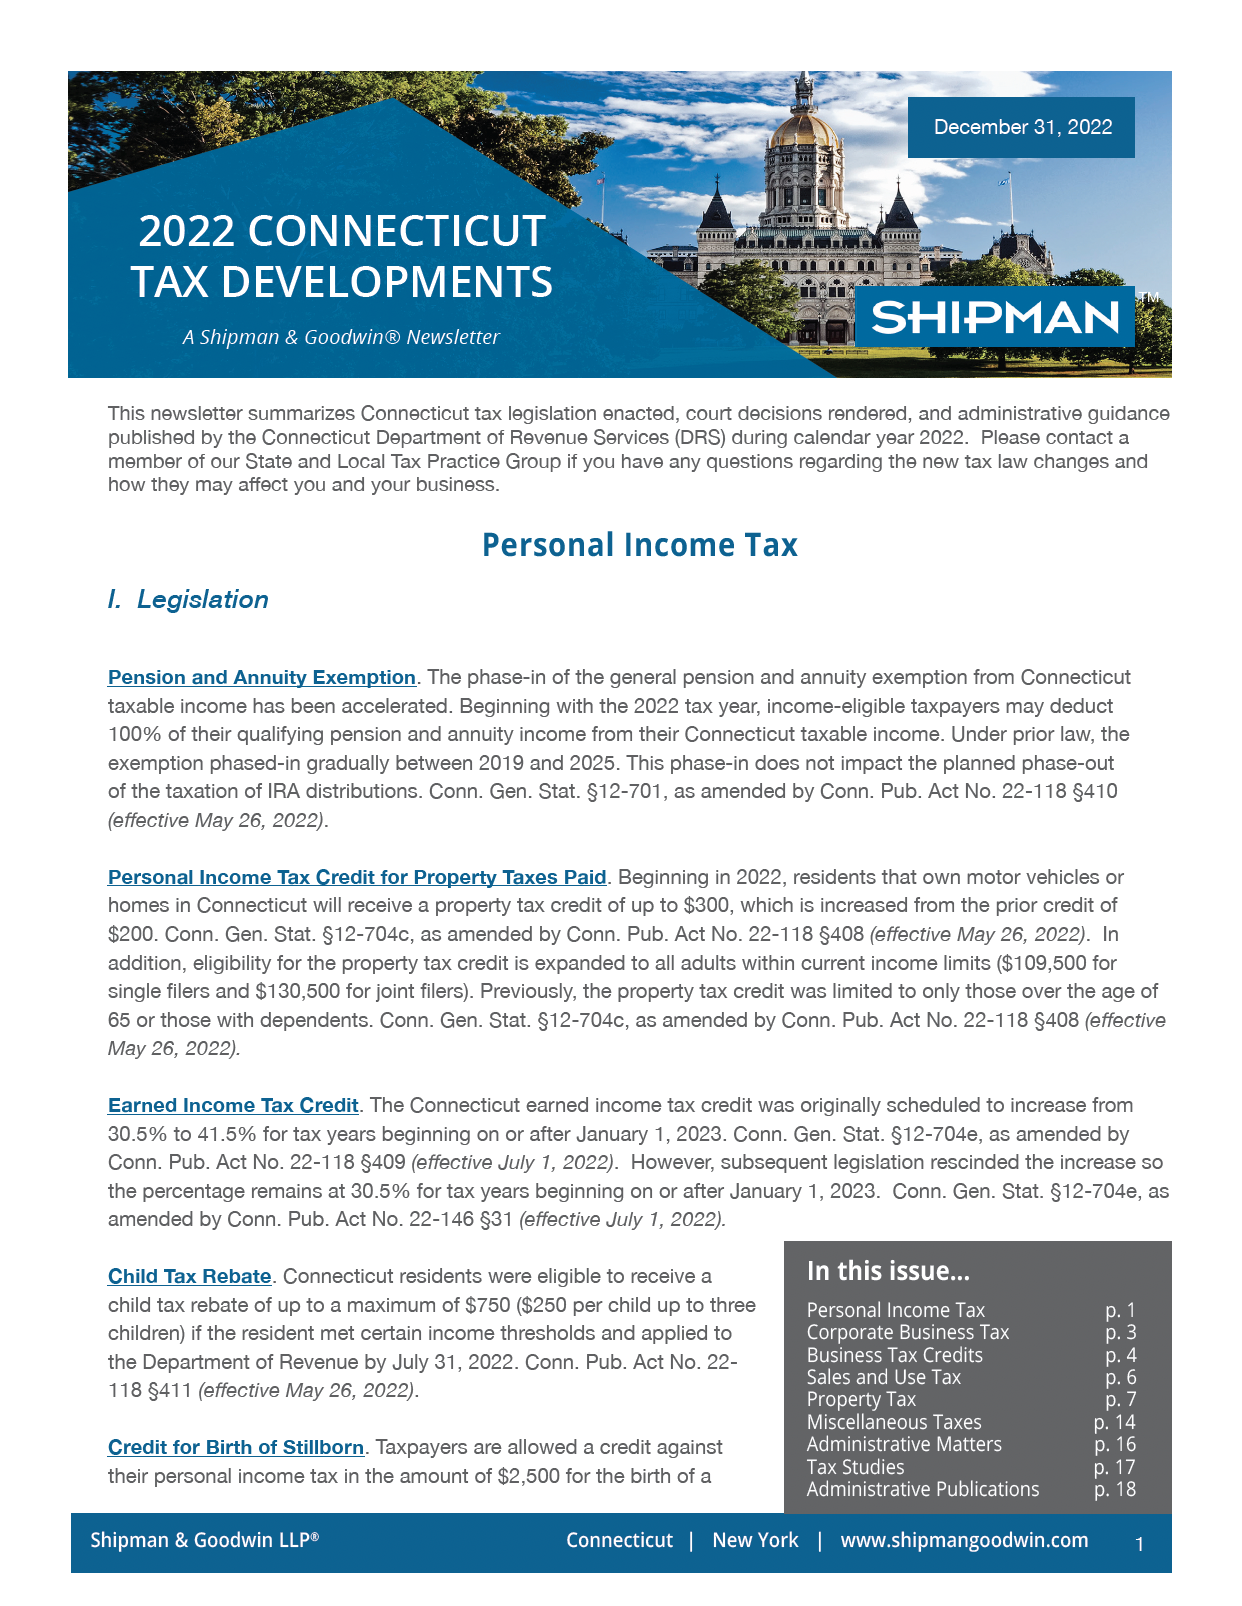 Screenshot of 2022 Connecticut Tax Updates Cover page